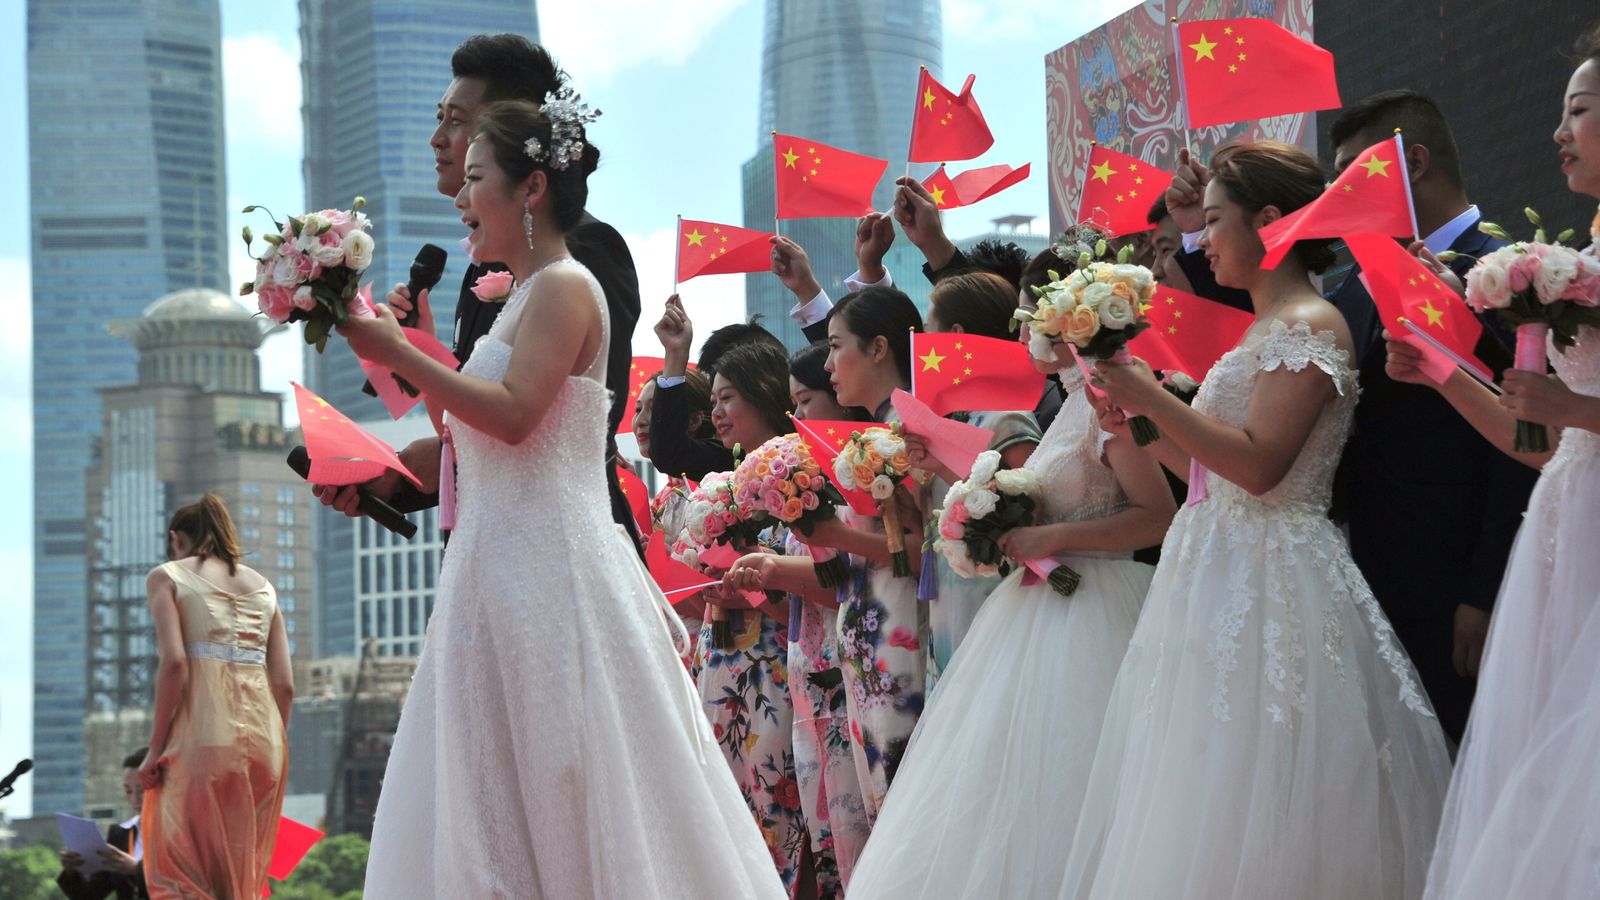 Couples holding Chinese flags sing as they attend a mass wedding on the Bund ahead of the 70th anniversary of People's Republic of China, in Shanghai, China September 19, 2019. REUTERS/Stringer ATTENTION EDITORS - THIS IMAGE WAS PROVIDED BY A THIRD PARTY. CHINA OUT.